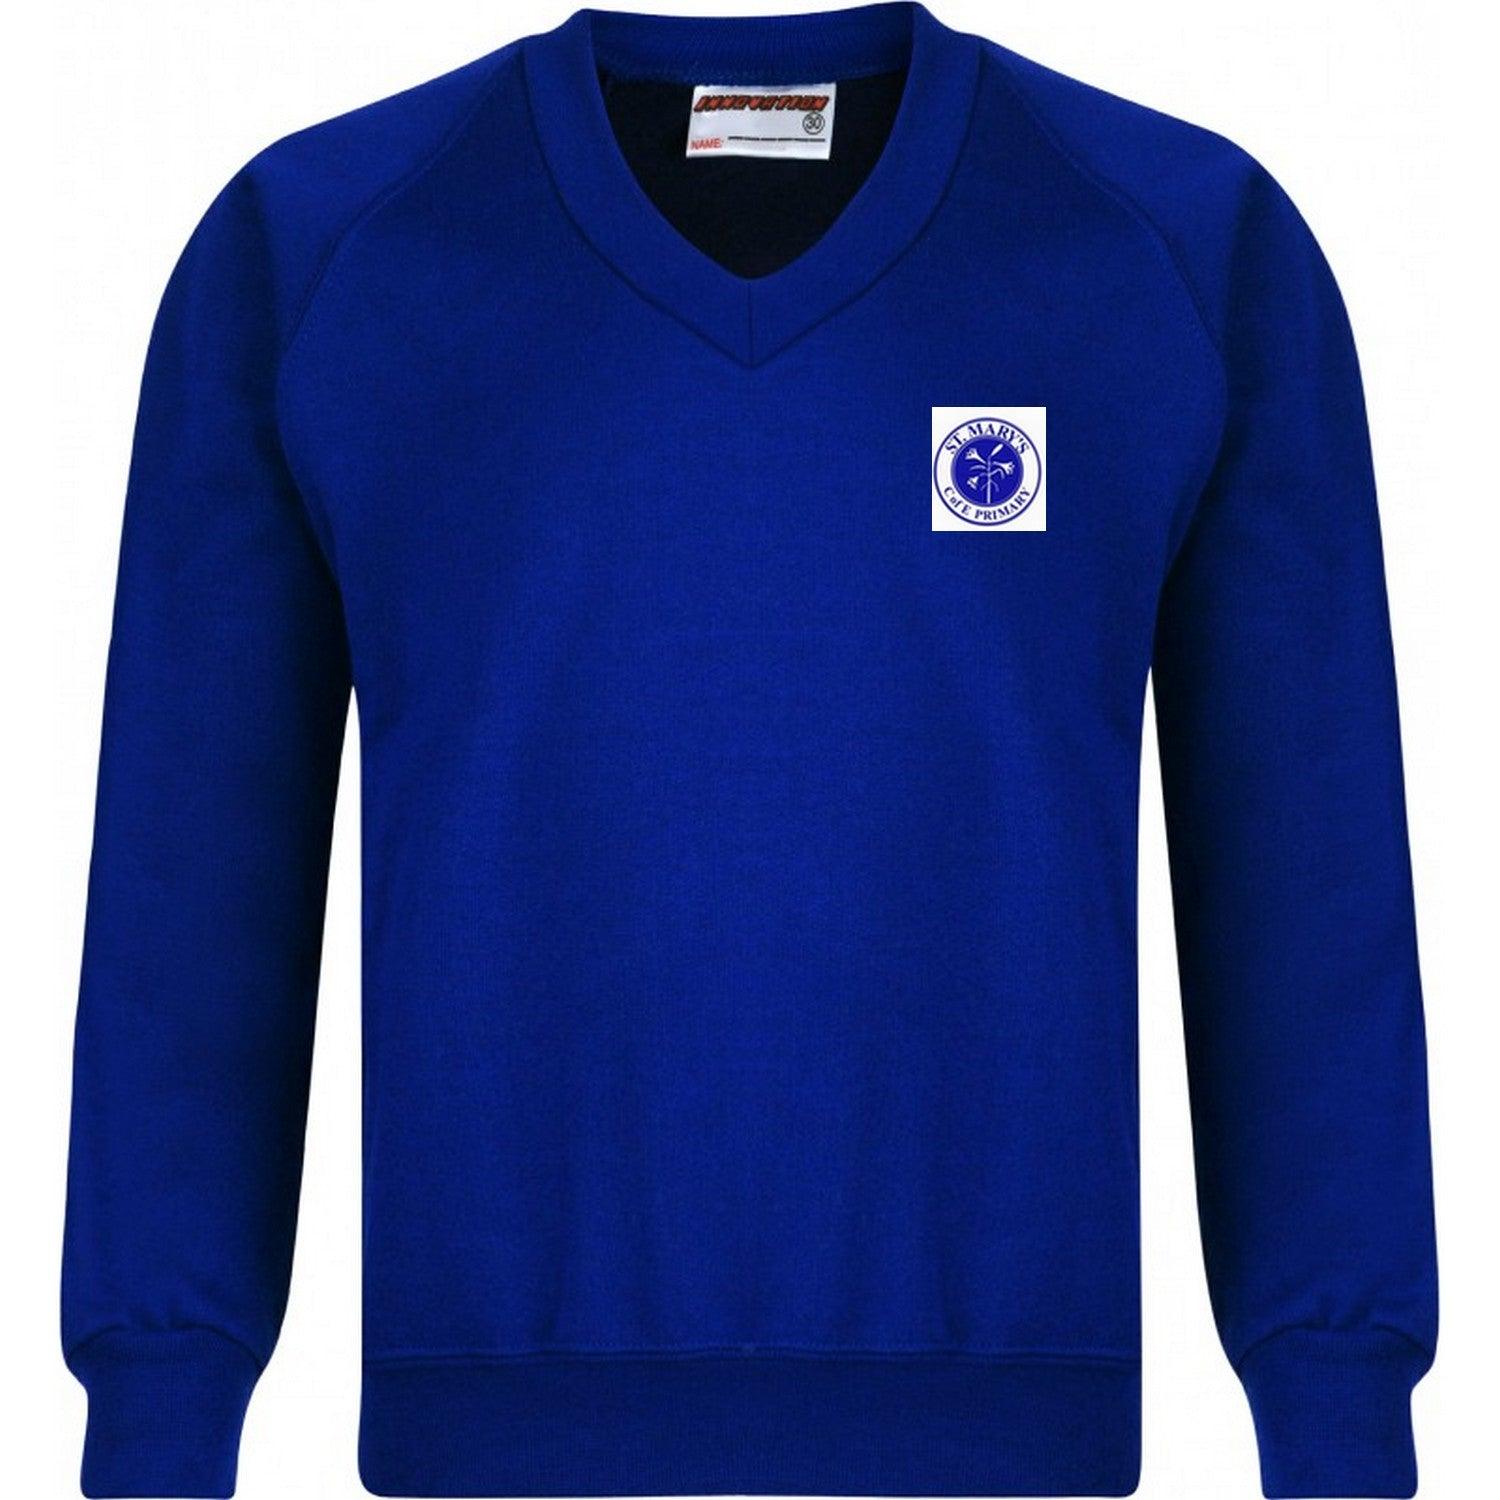 St Mary's C of E Primary School, Prittlewell - Royal V-neck Sweatshirt with School Logo - Schoolwear Centres | School Uniform Centres